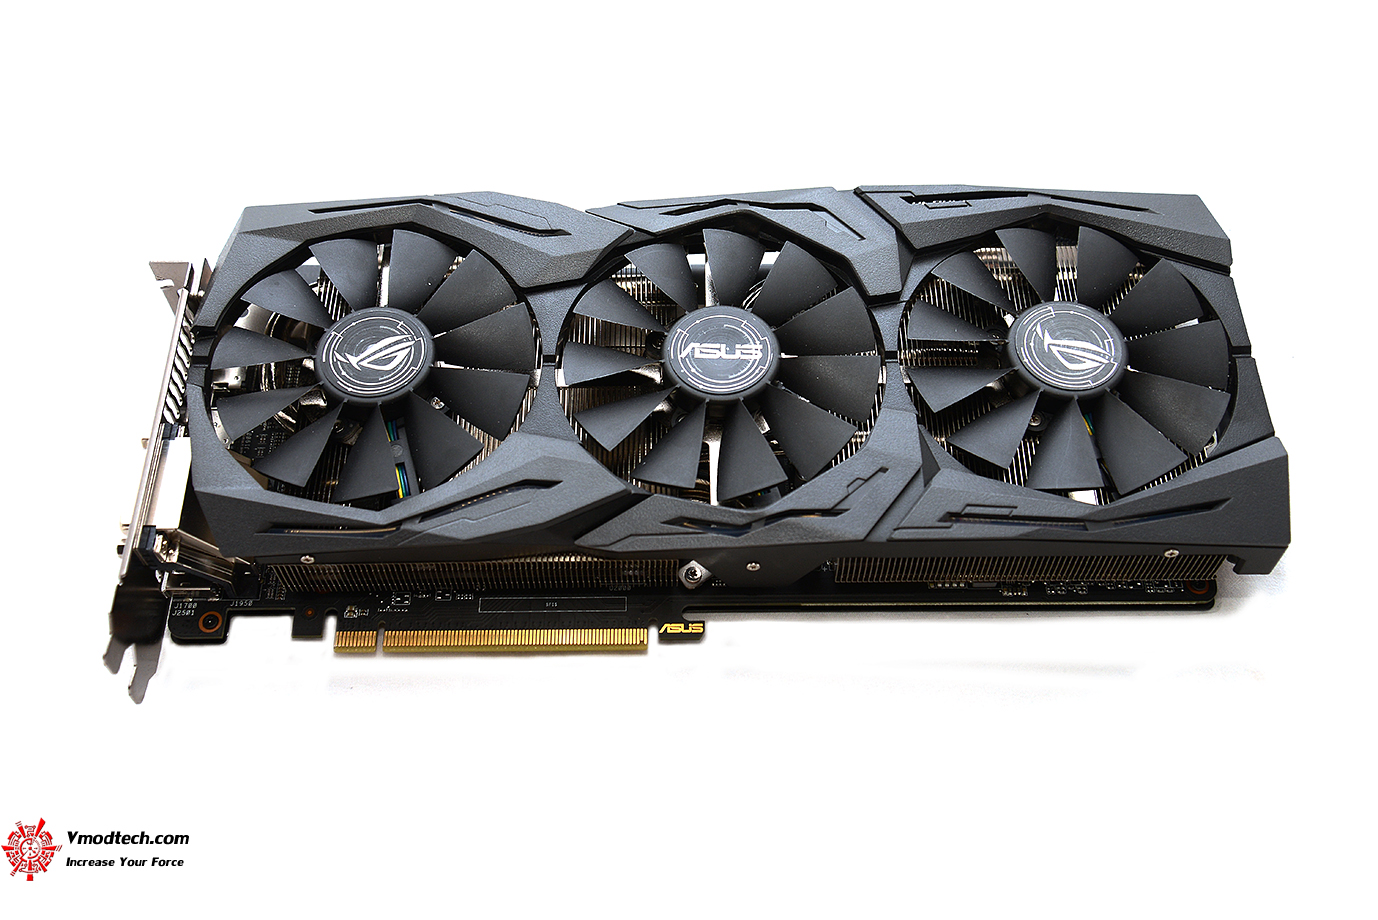 dsc 2357 ASUS ROG STRIX RX480 8G GAMING REVIEW